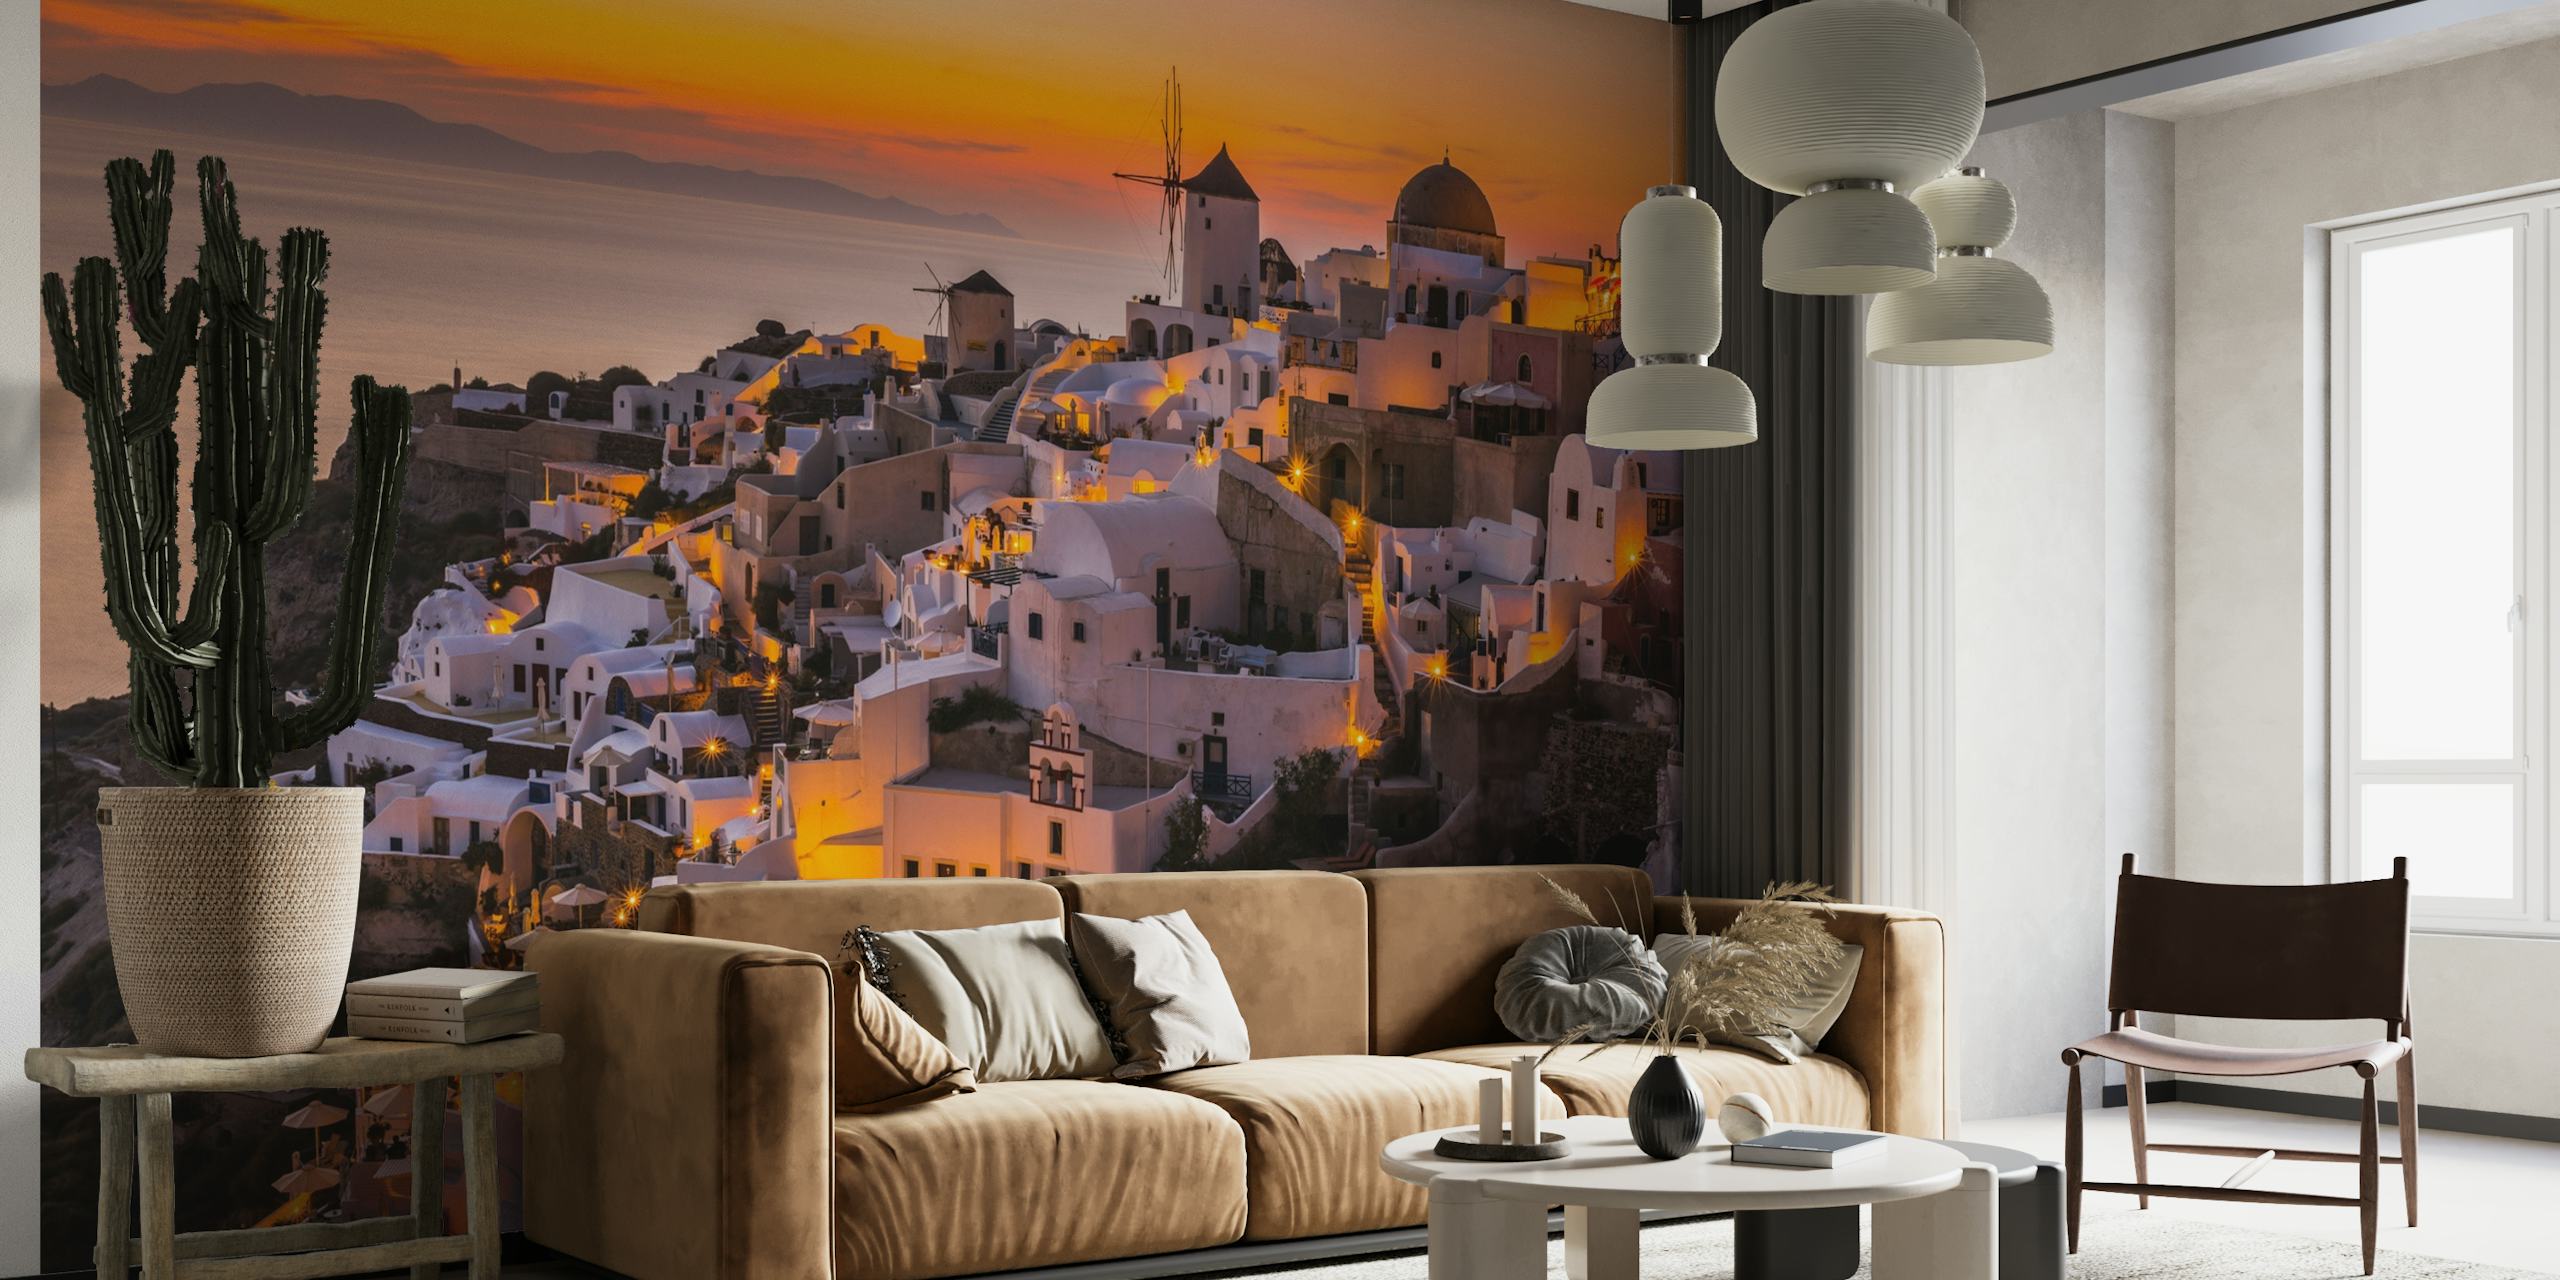 Santorini sunset wall mural with white buildings and blue domes